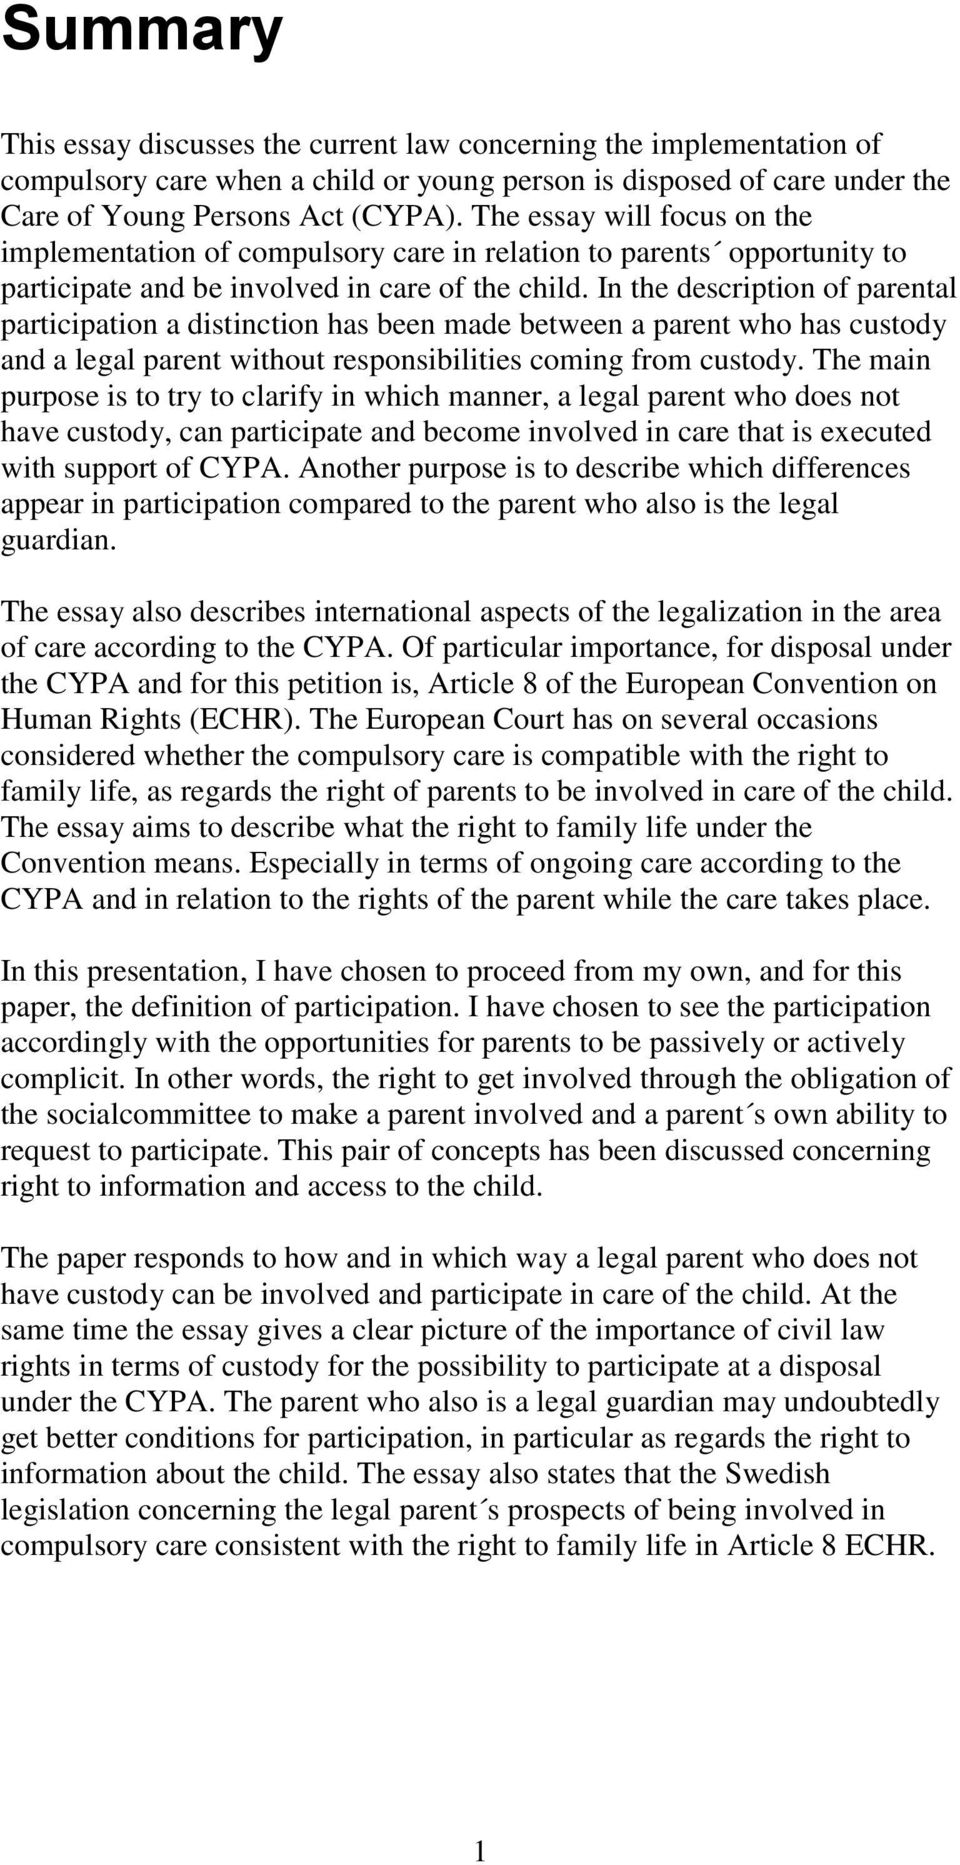 In the description of parental participation a distinction has been made between a parent who has custody and a legal parent without responsibilities coming from custody.